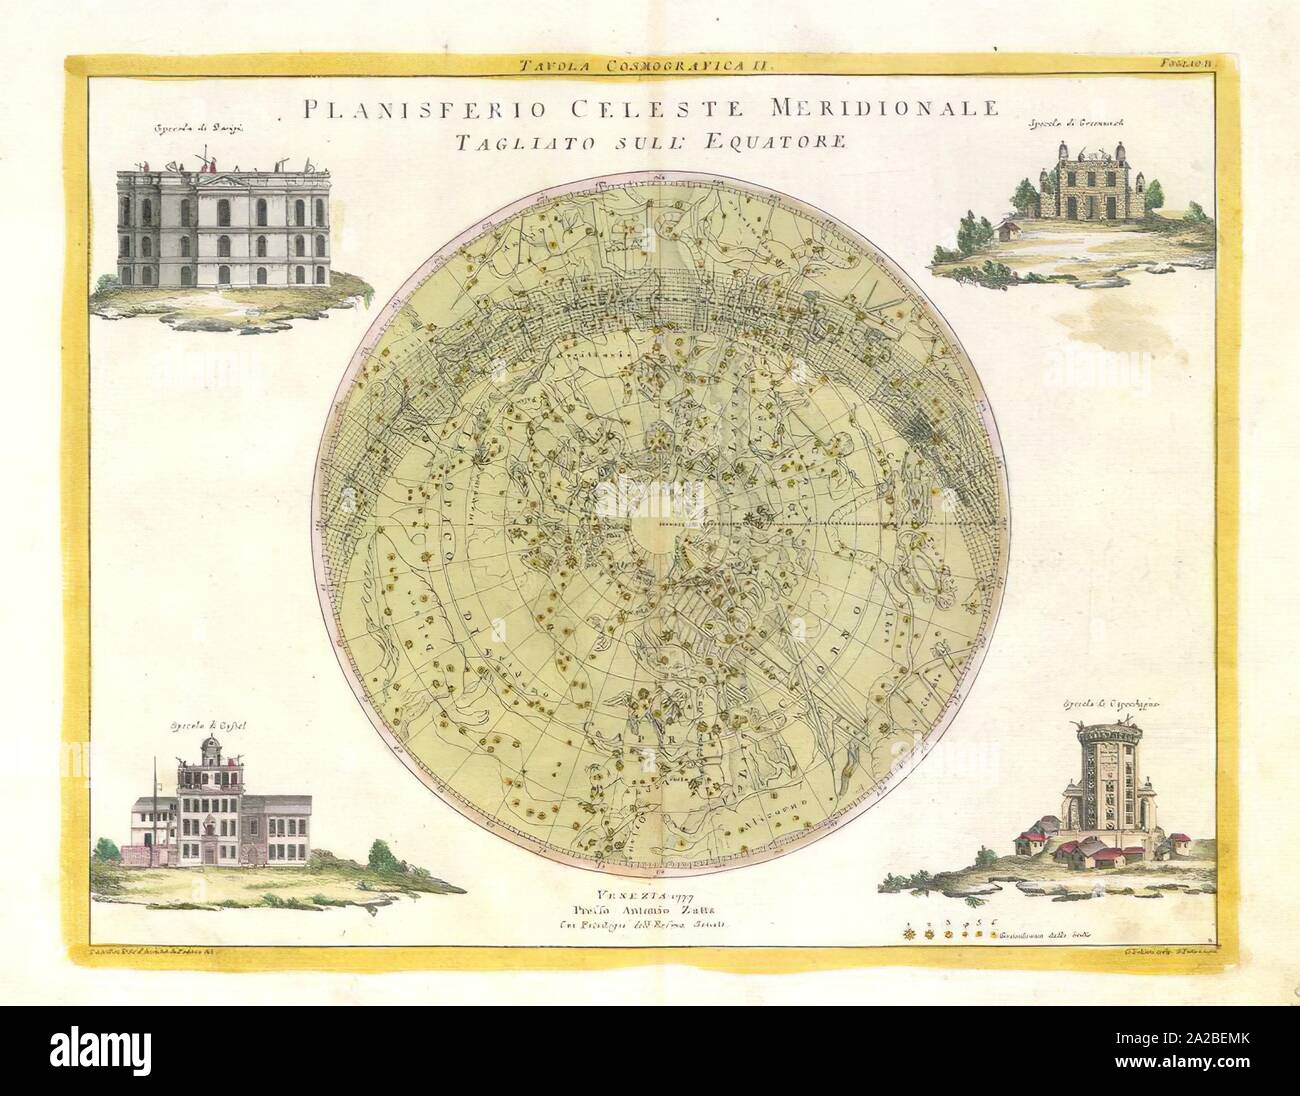 Southern Celestial Planisphere, 1777. A star map of the night sky in the southern hemisphere. Colored engraving, 1777. The corners the image have Stock Photo